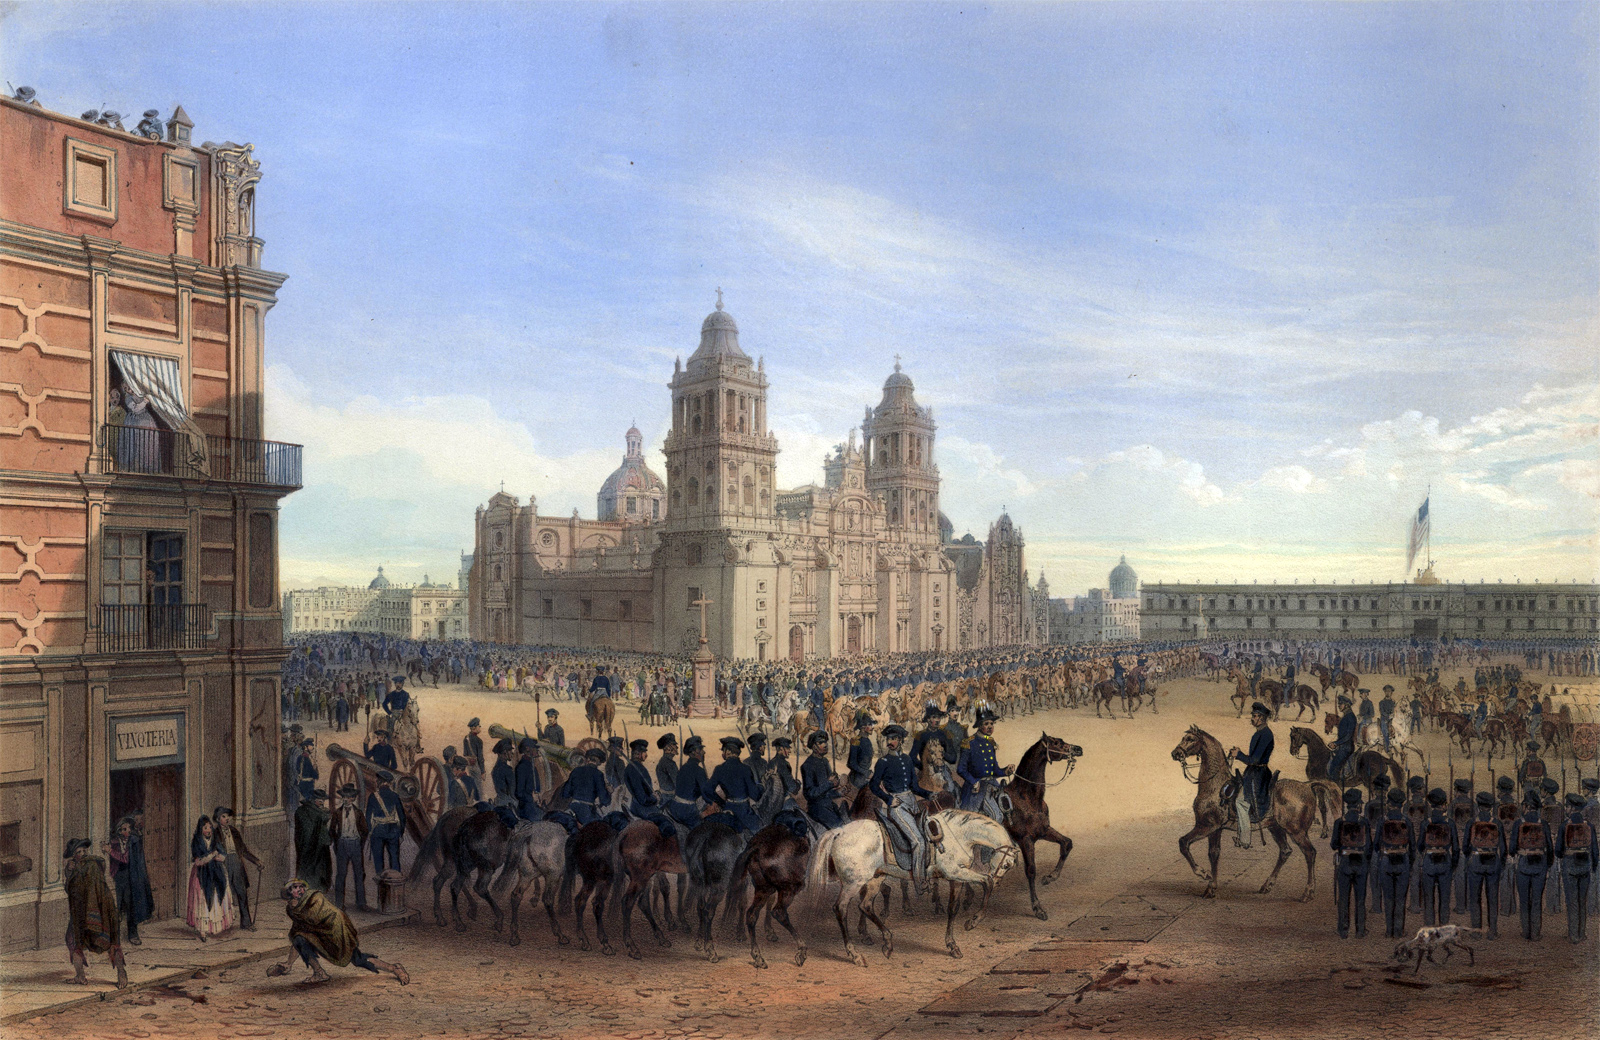 A group of soldiers on horses entering a Mexican city as civilians watch.